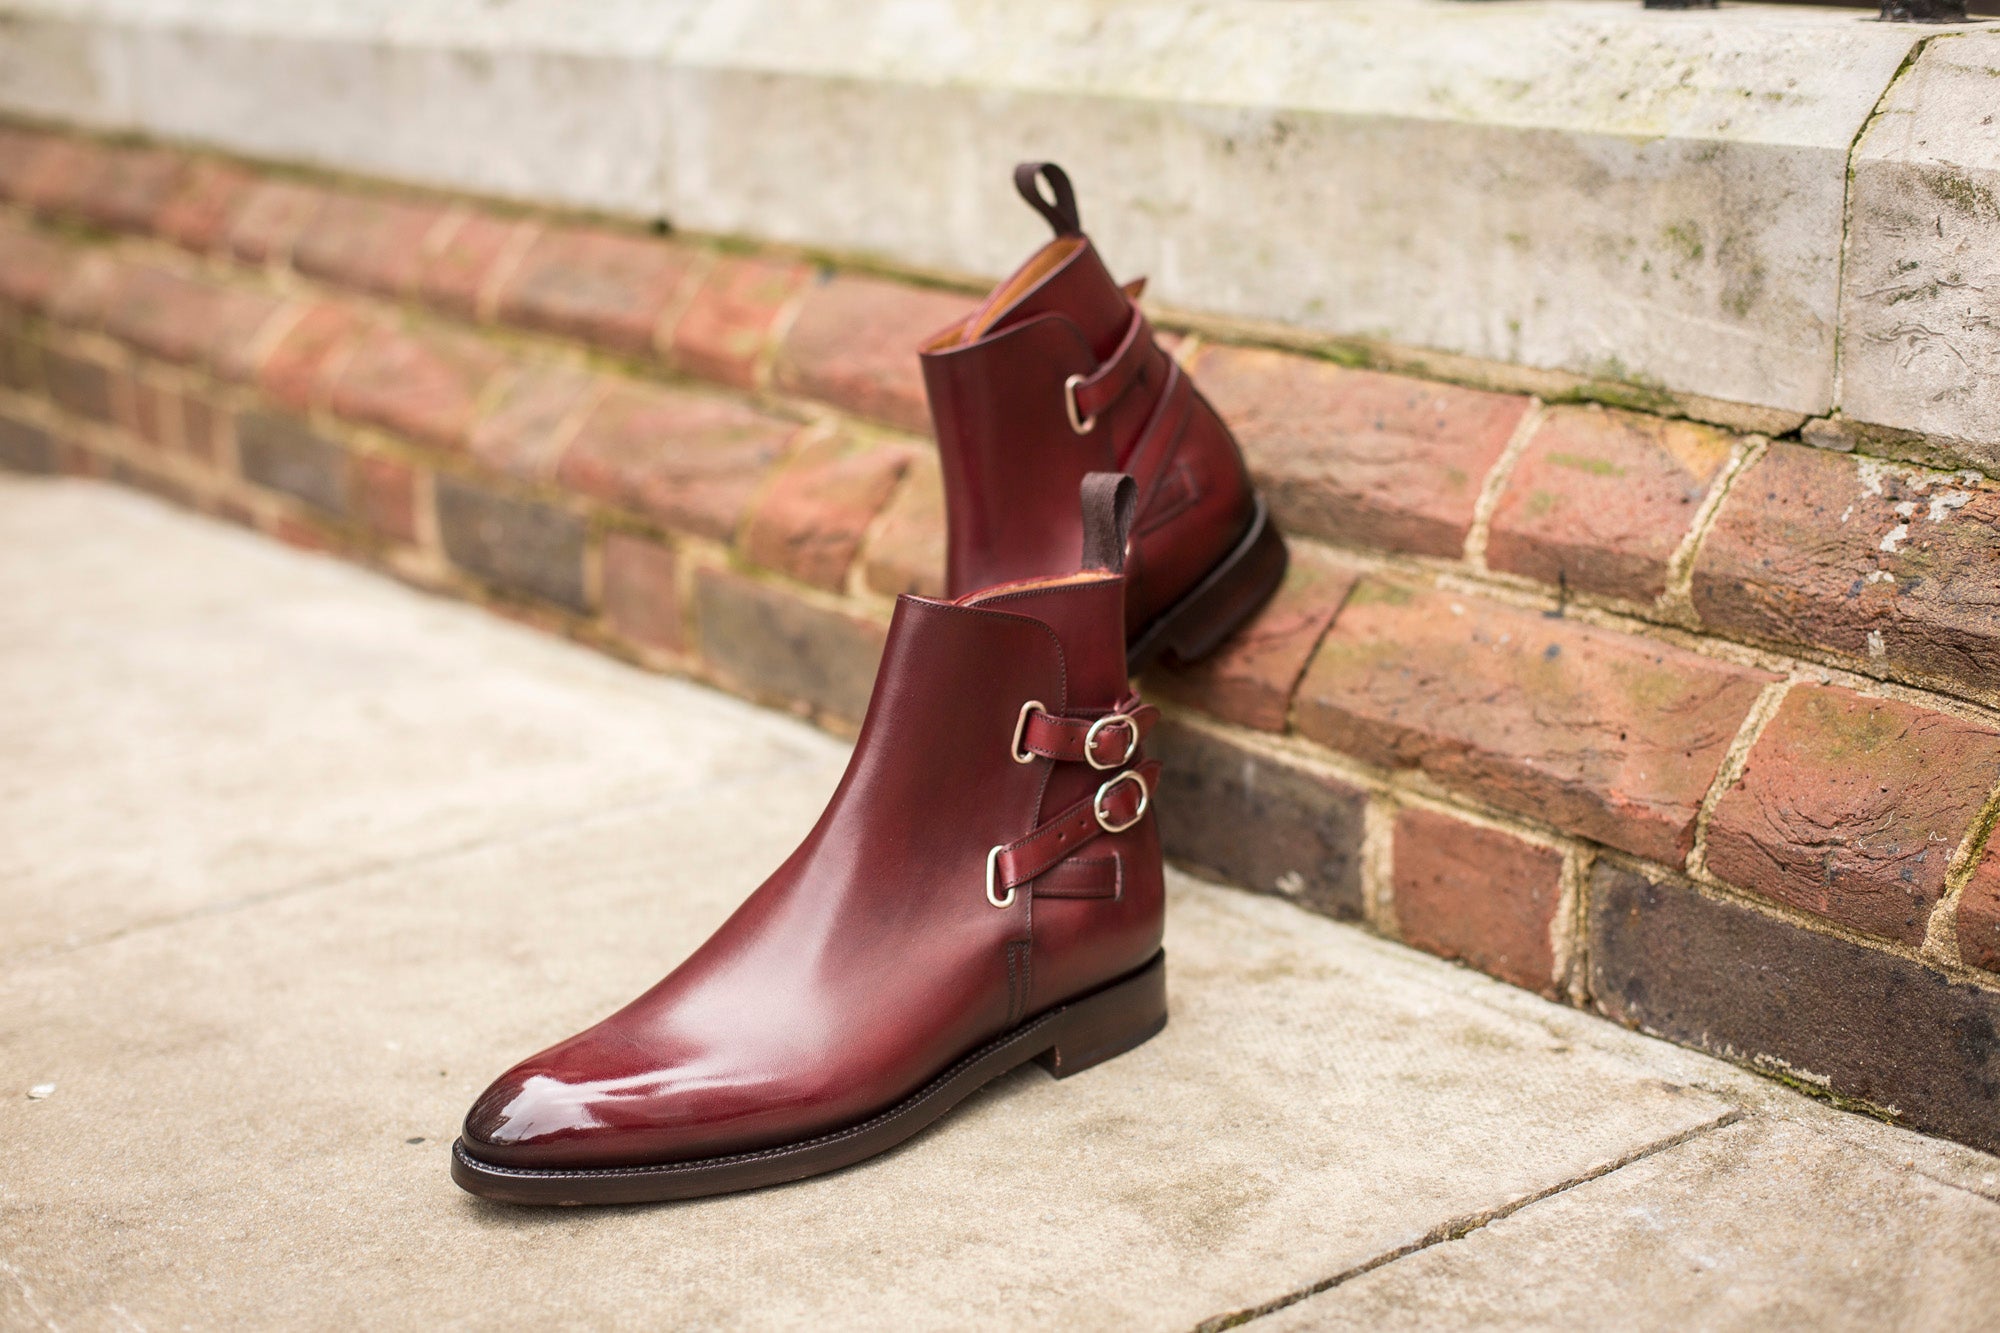 Genesee - MTO - Burgundy Calf - NGT Last - Double Country Rubber Sole